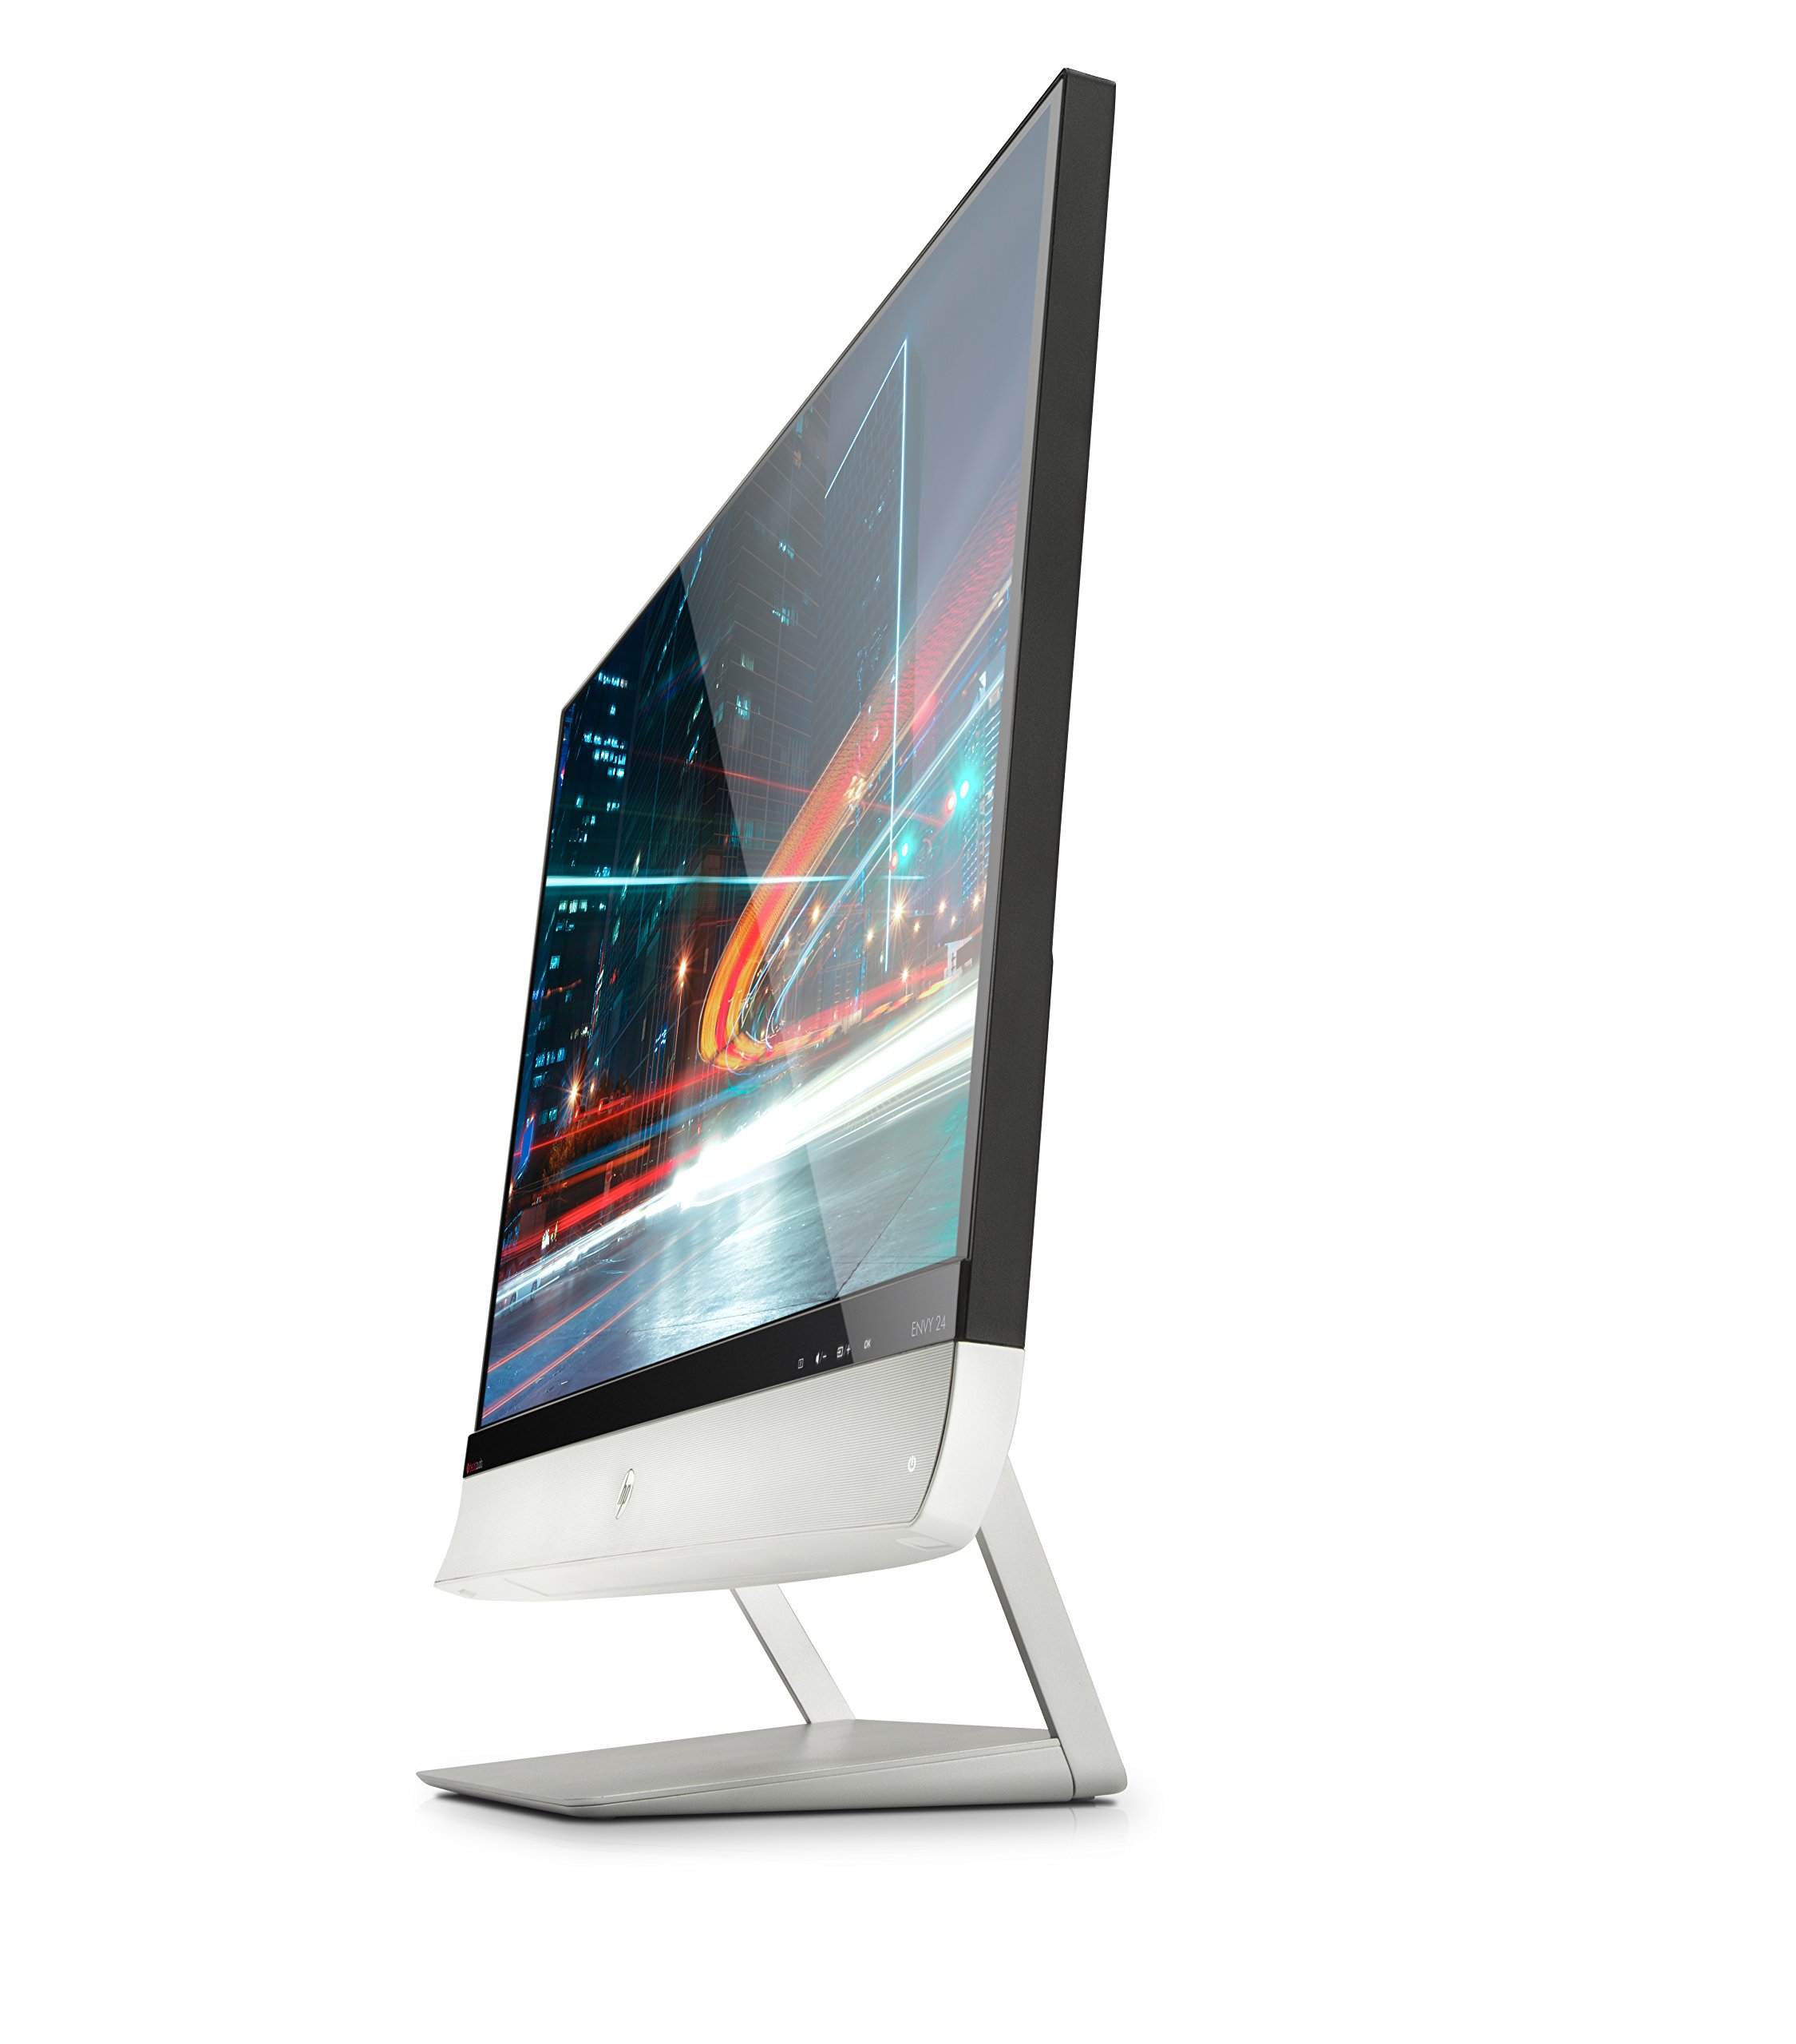 ENVY 32-inch Media Display with Beats Audio